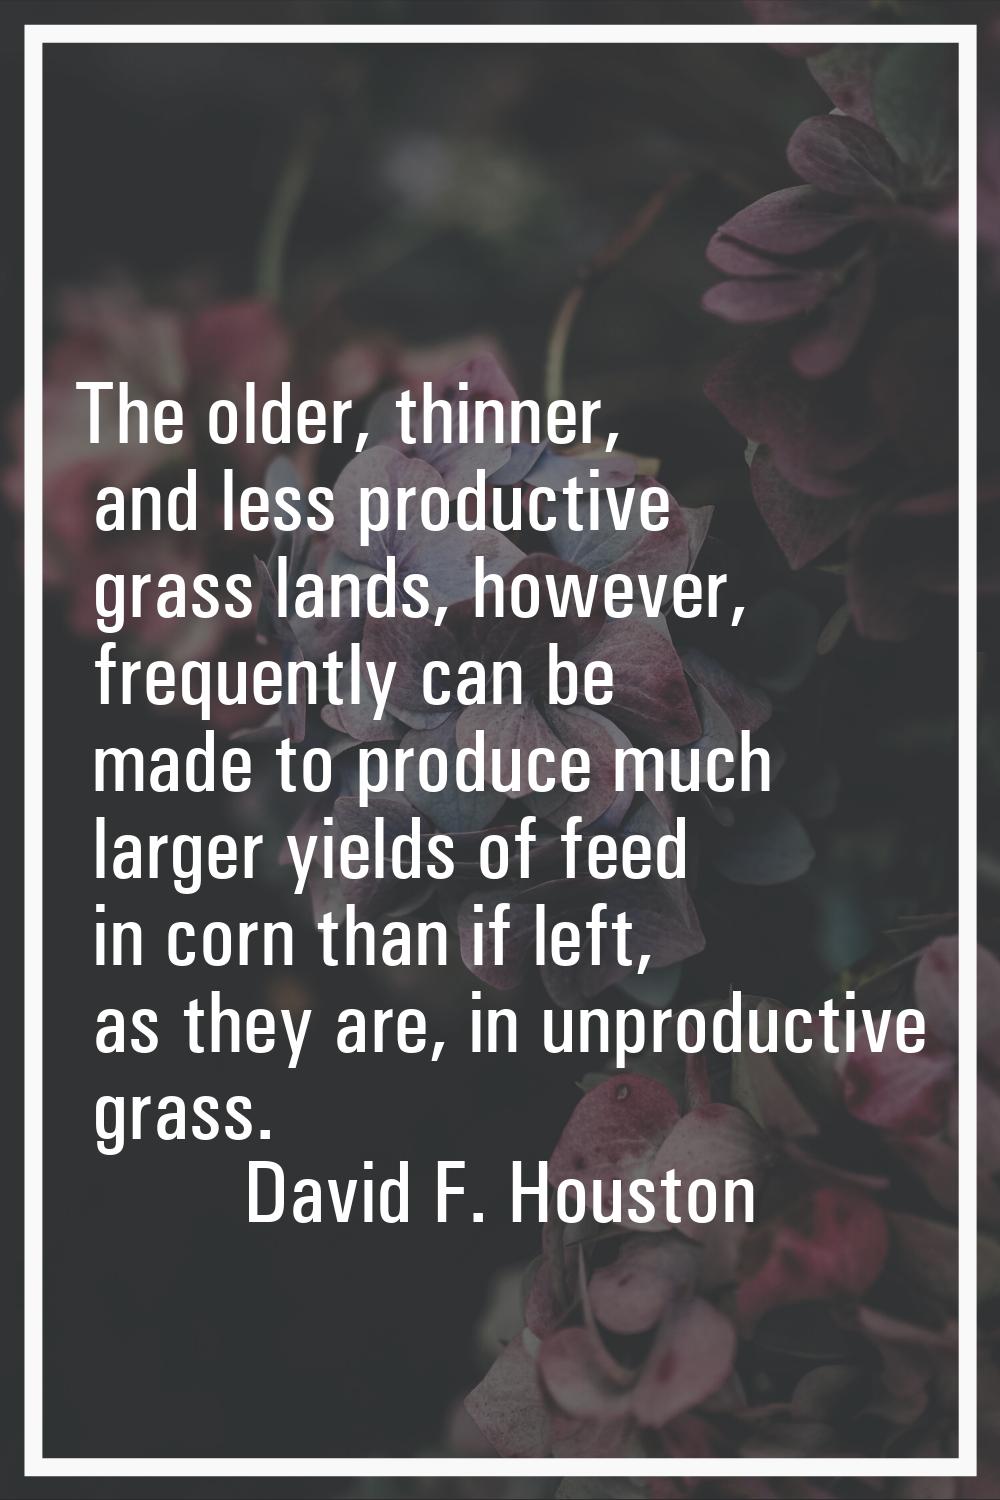 The older, thinner, and less productive grass lands, however, frequently can be made to produce muc